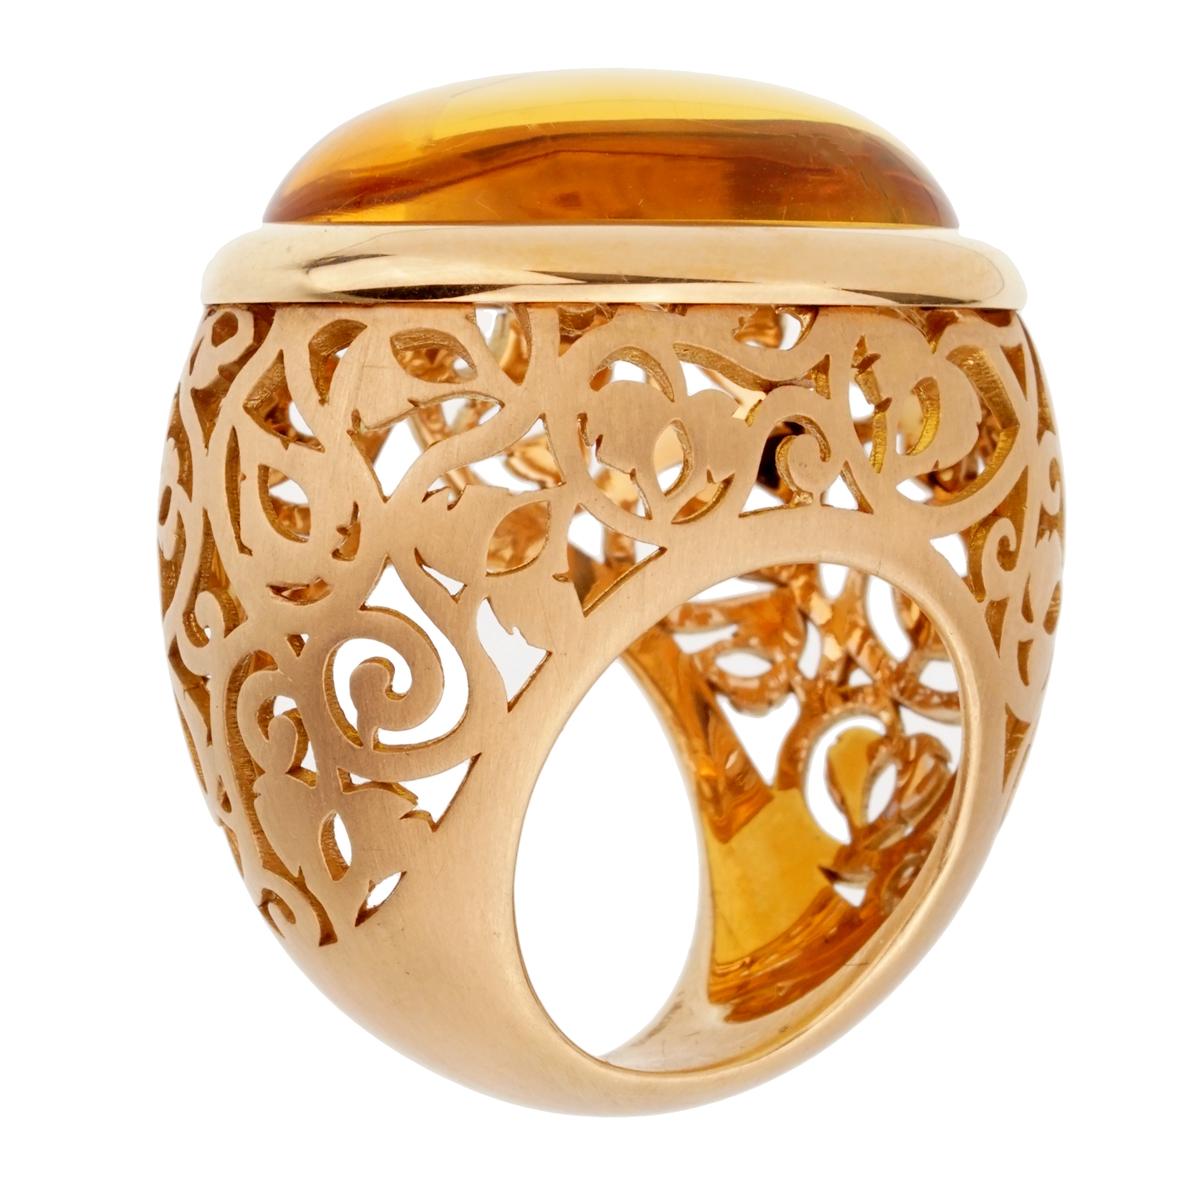 A magnificent brand new Pomellato rose gold cocktail ring showcasing a 19.94ct cabochon Amber. The ring measures a size 6.25 and can be resized.

Pomellato Retail Price: $7,800
Sku: 2327